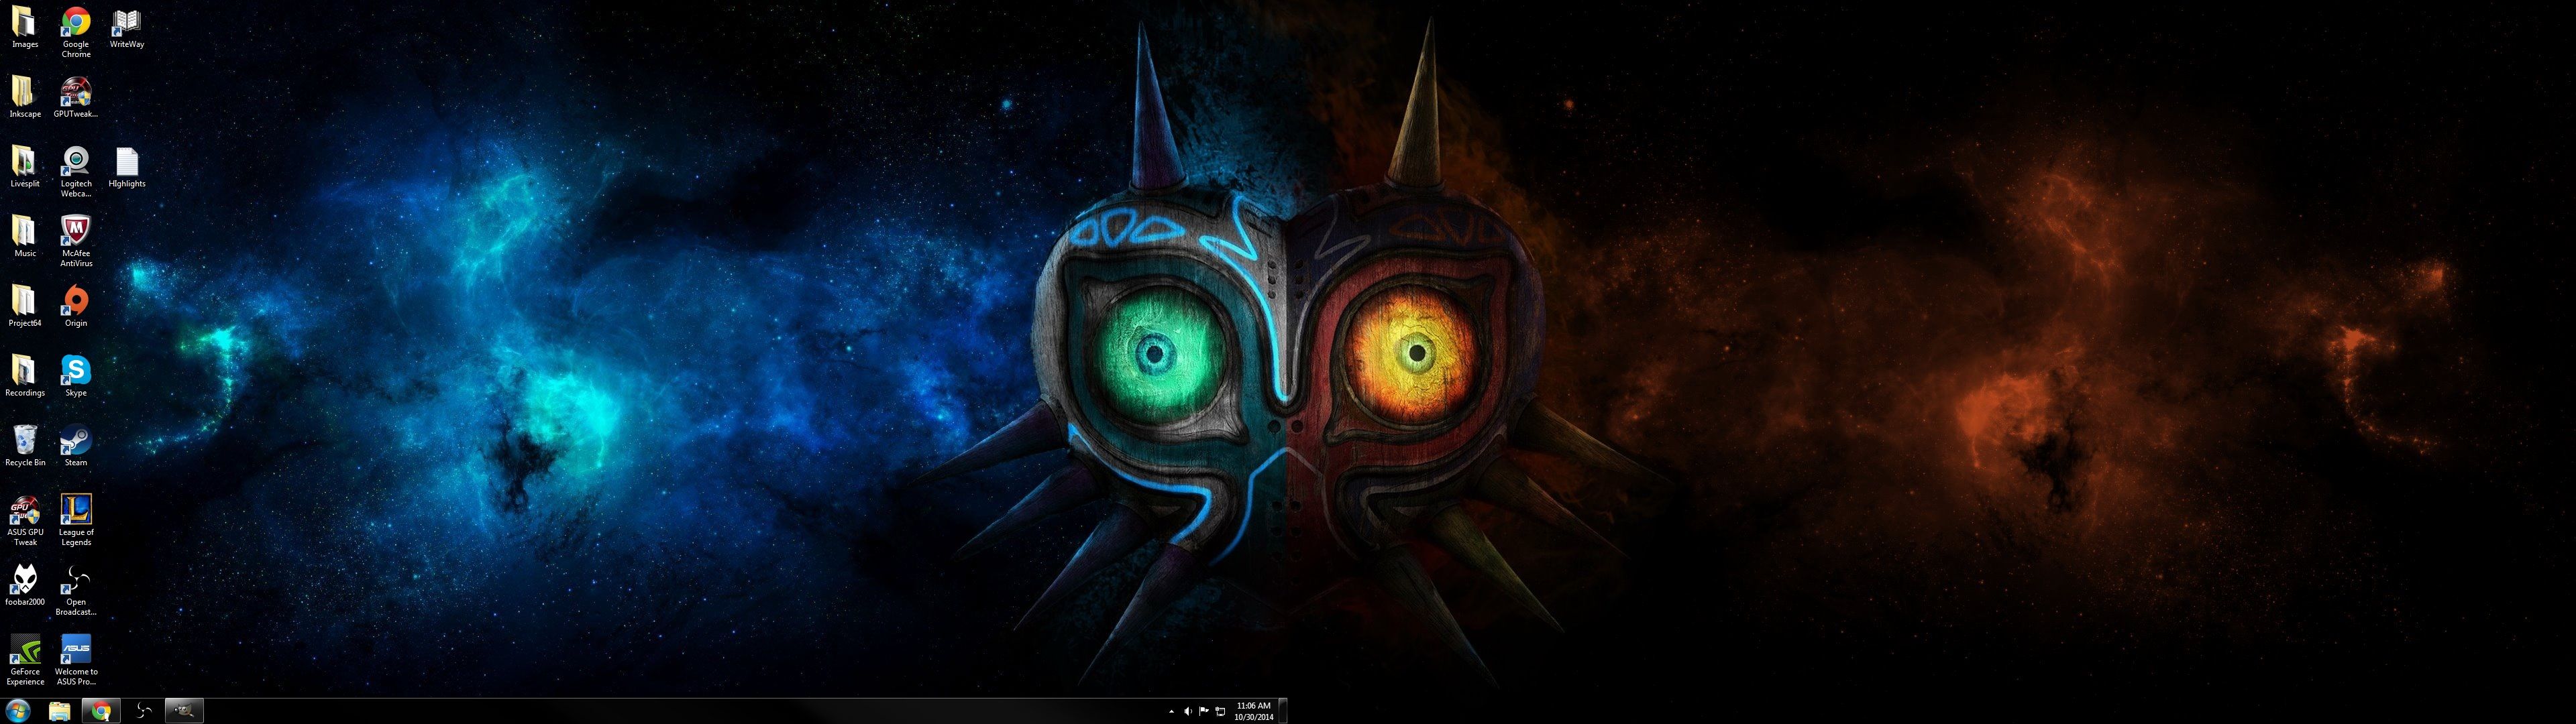 So I combined two desktops to make a dual monitor desktop. - Imgur